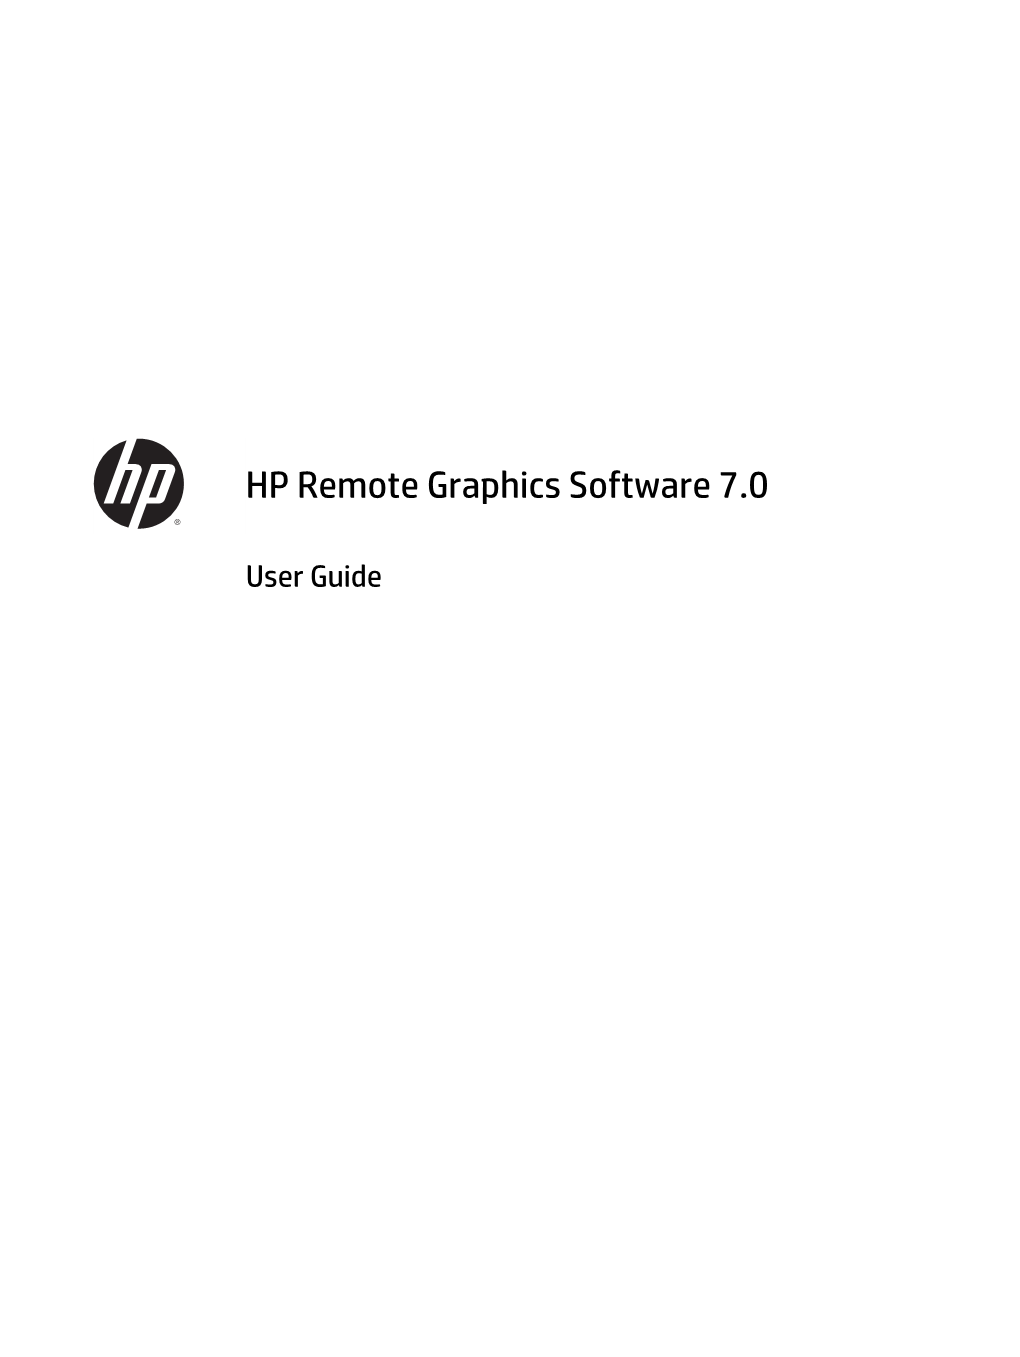 HP Remote Graphics Software 7.0